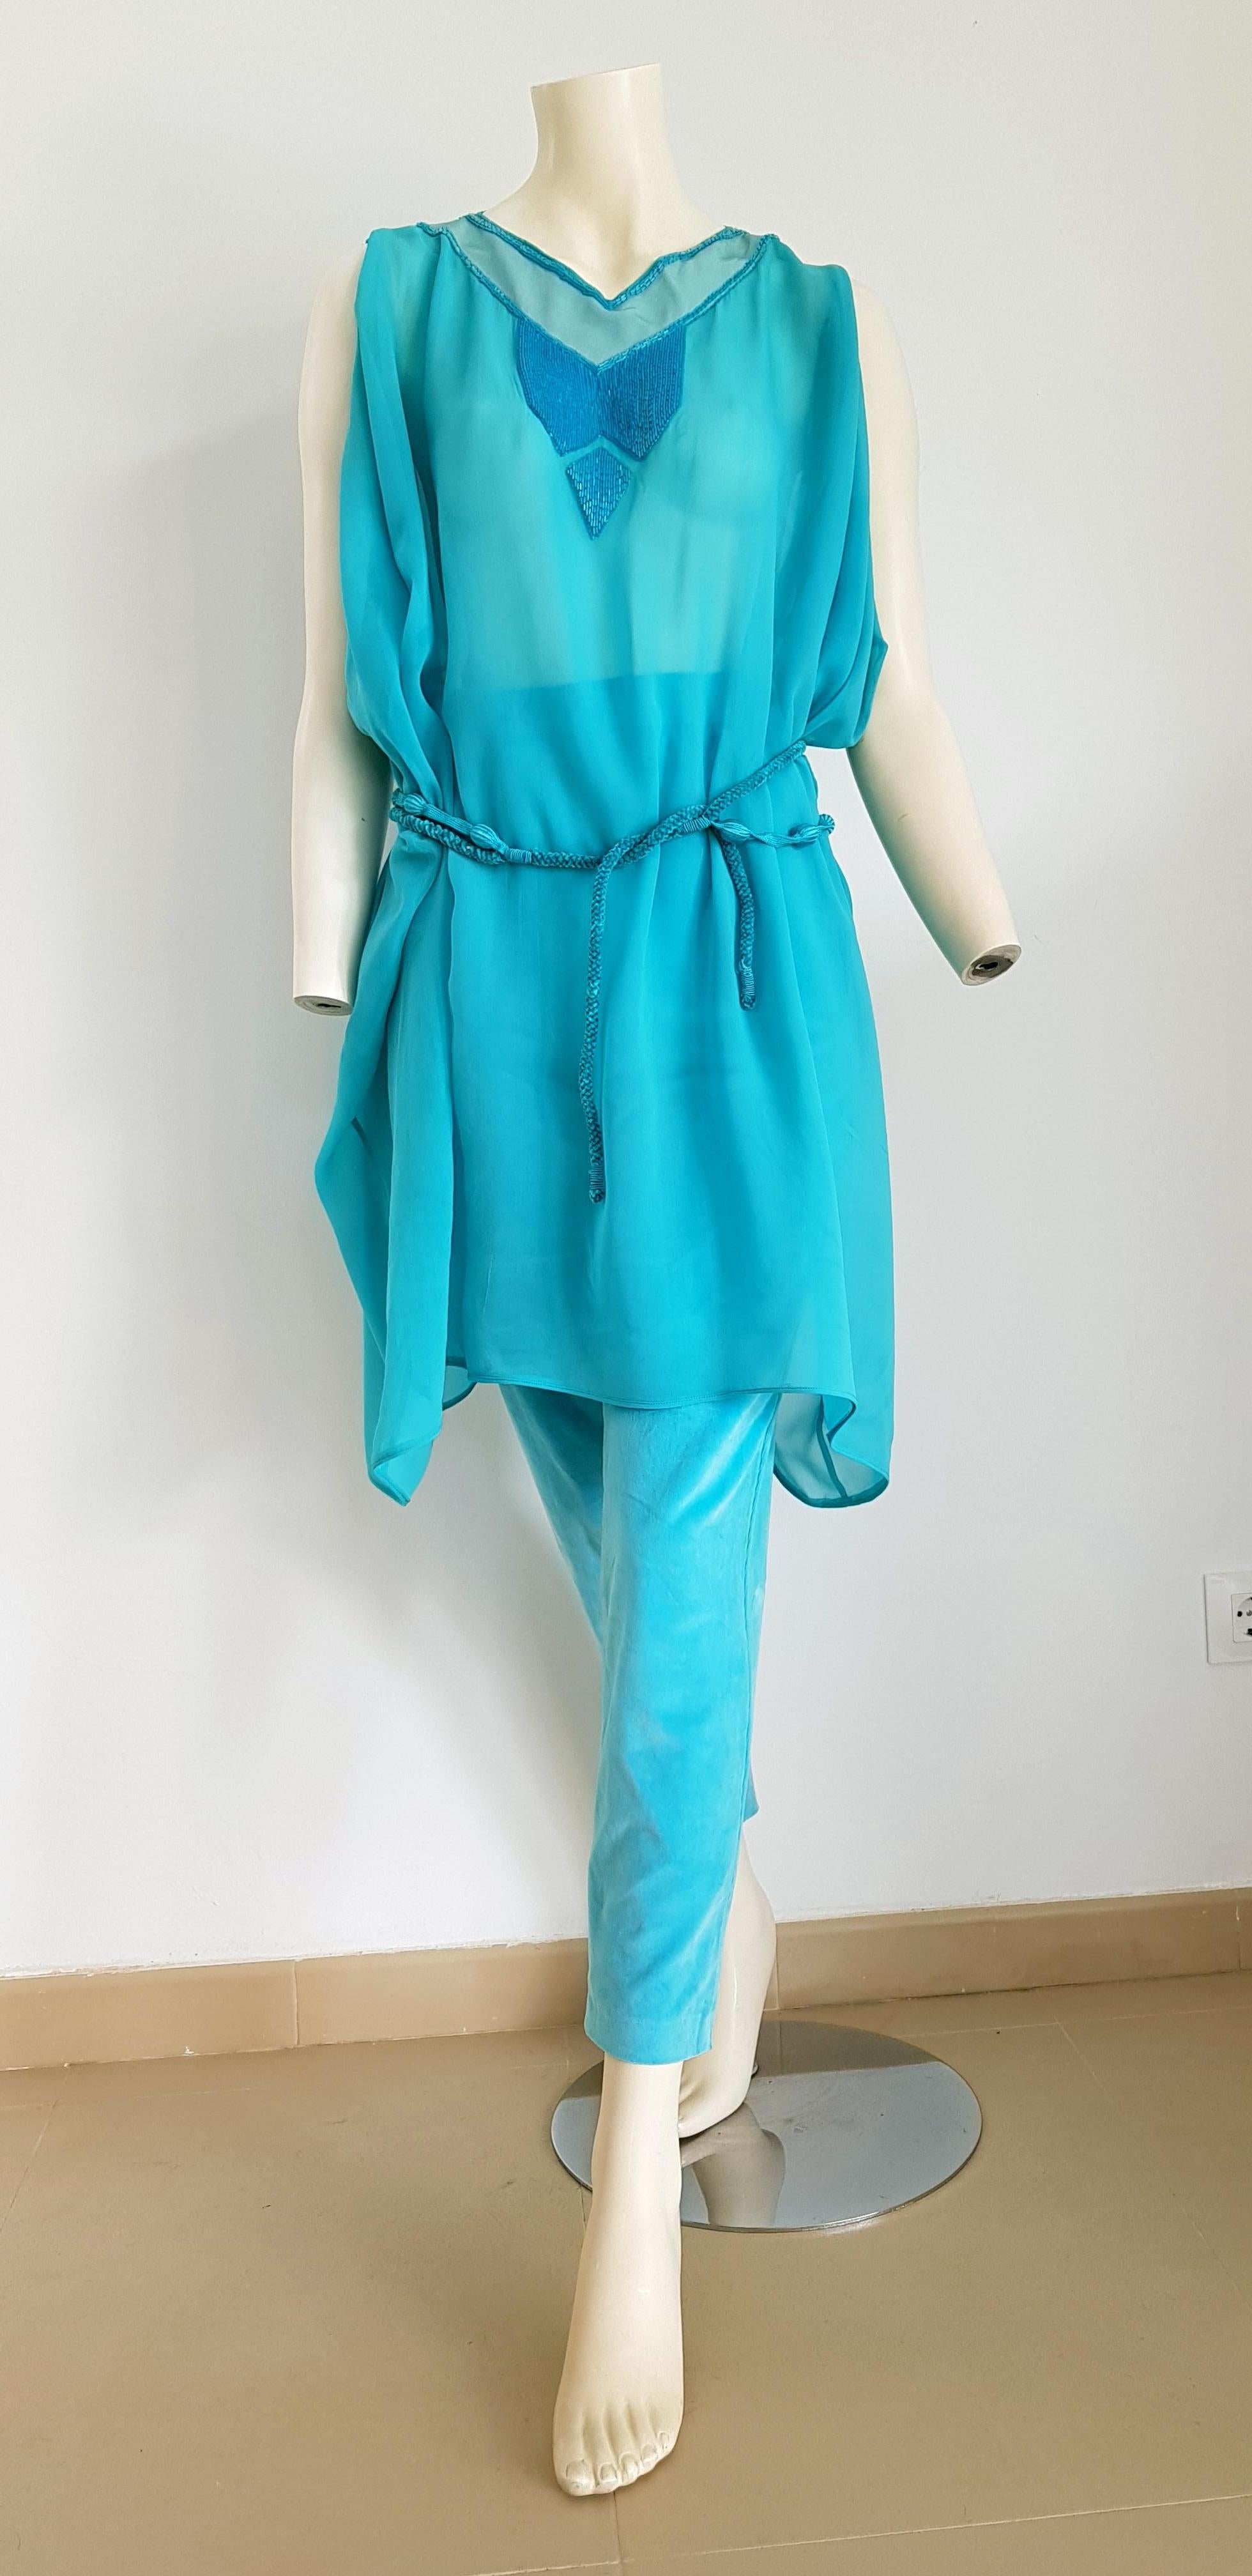 Gianni VERSACE Haute Couture single piece unique design silk chiffon tunic and silk velvet pants two belts turquoise ensemble - Unworn, New

SIZE: equivalent to about Small / Medium, please review approx measurements as follows in cm. 
TUNIC: lenght